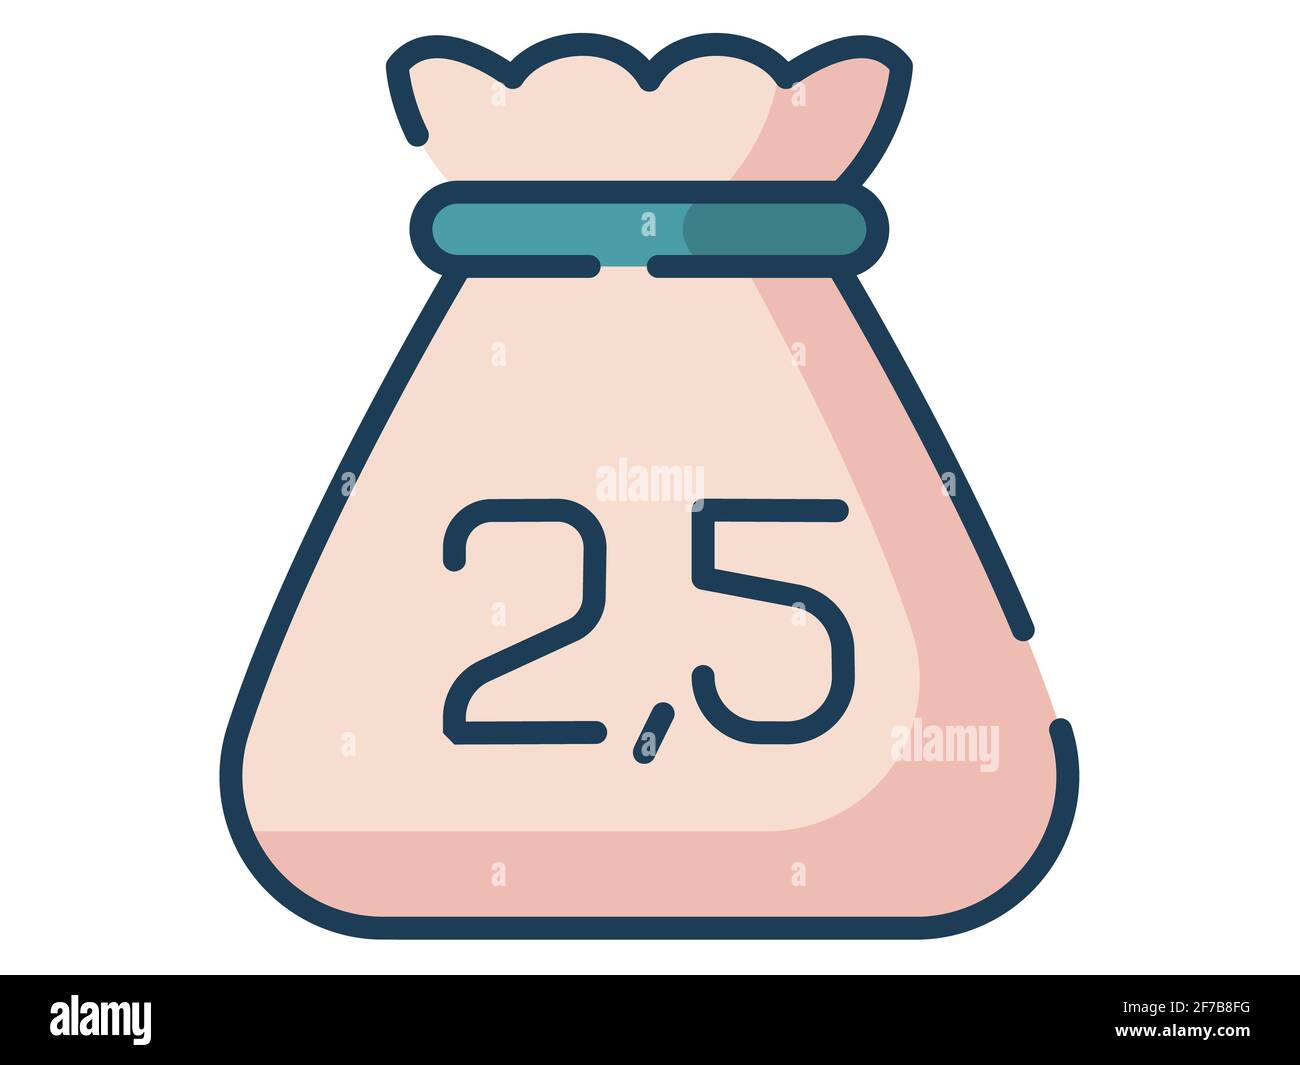 zakat charity giving ramadan single isolated icon with flat dash or dashed style vector illustration Stock Photo